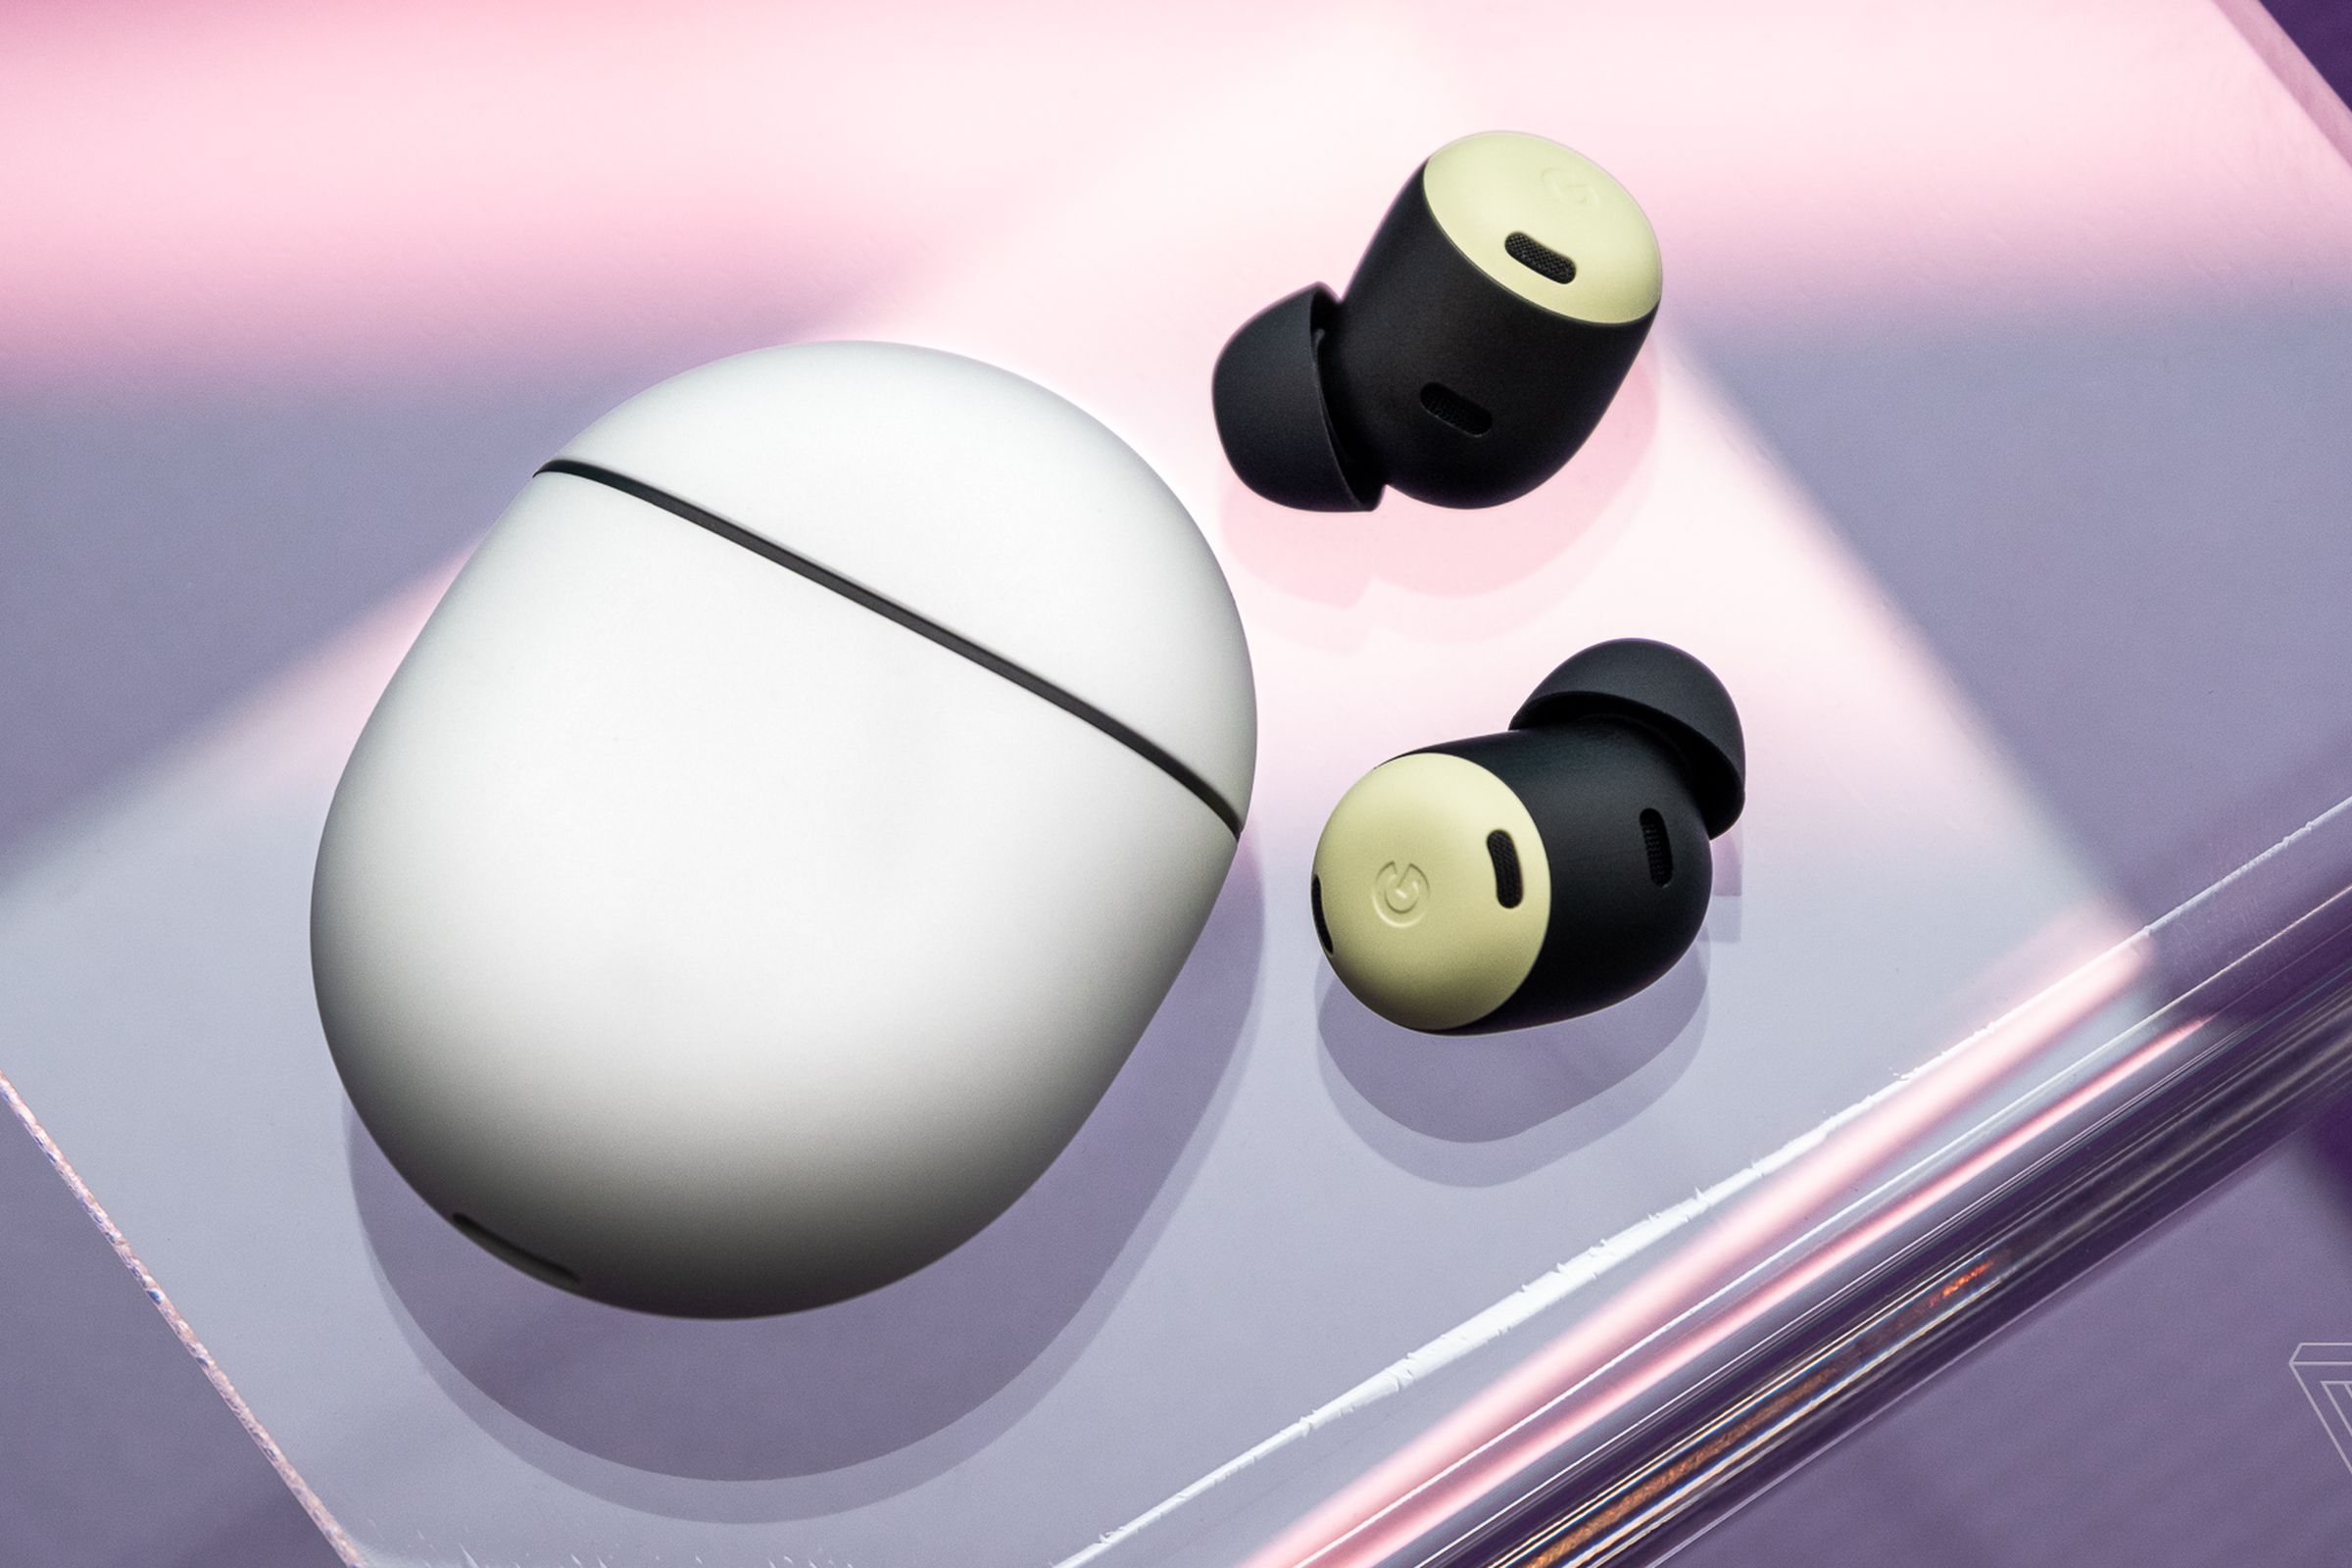 Image of Google Pixel Buds Pro headphones on a transparent stand with a purple background.